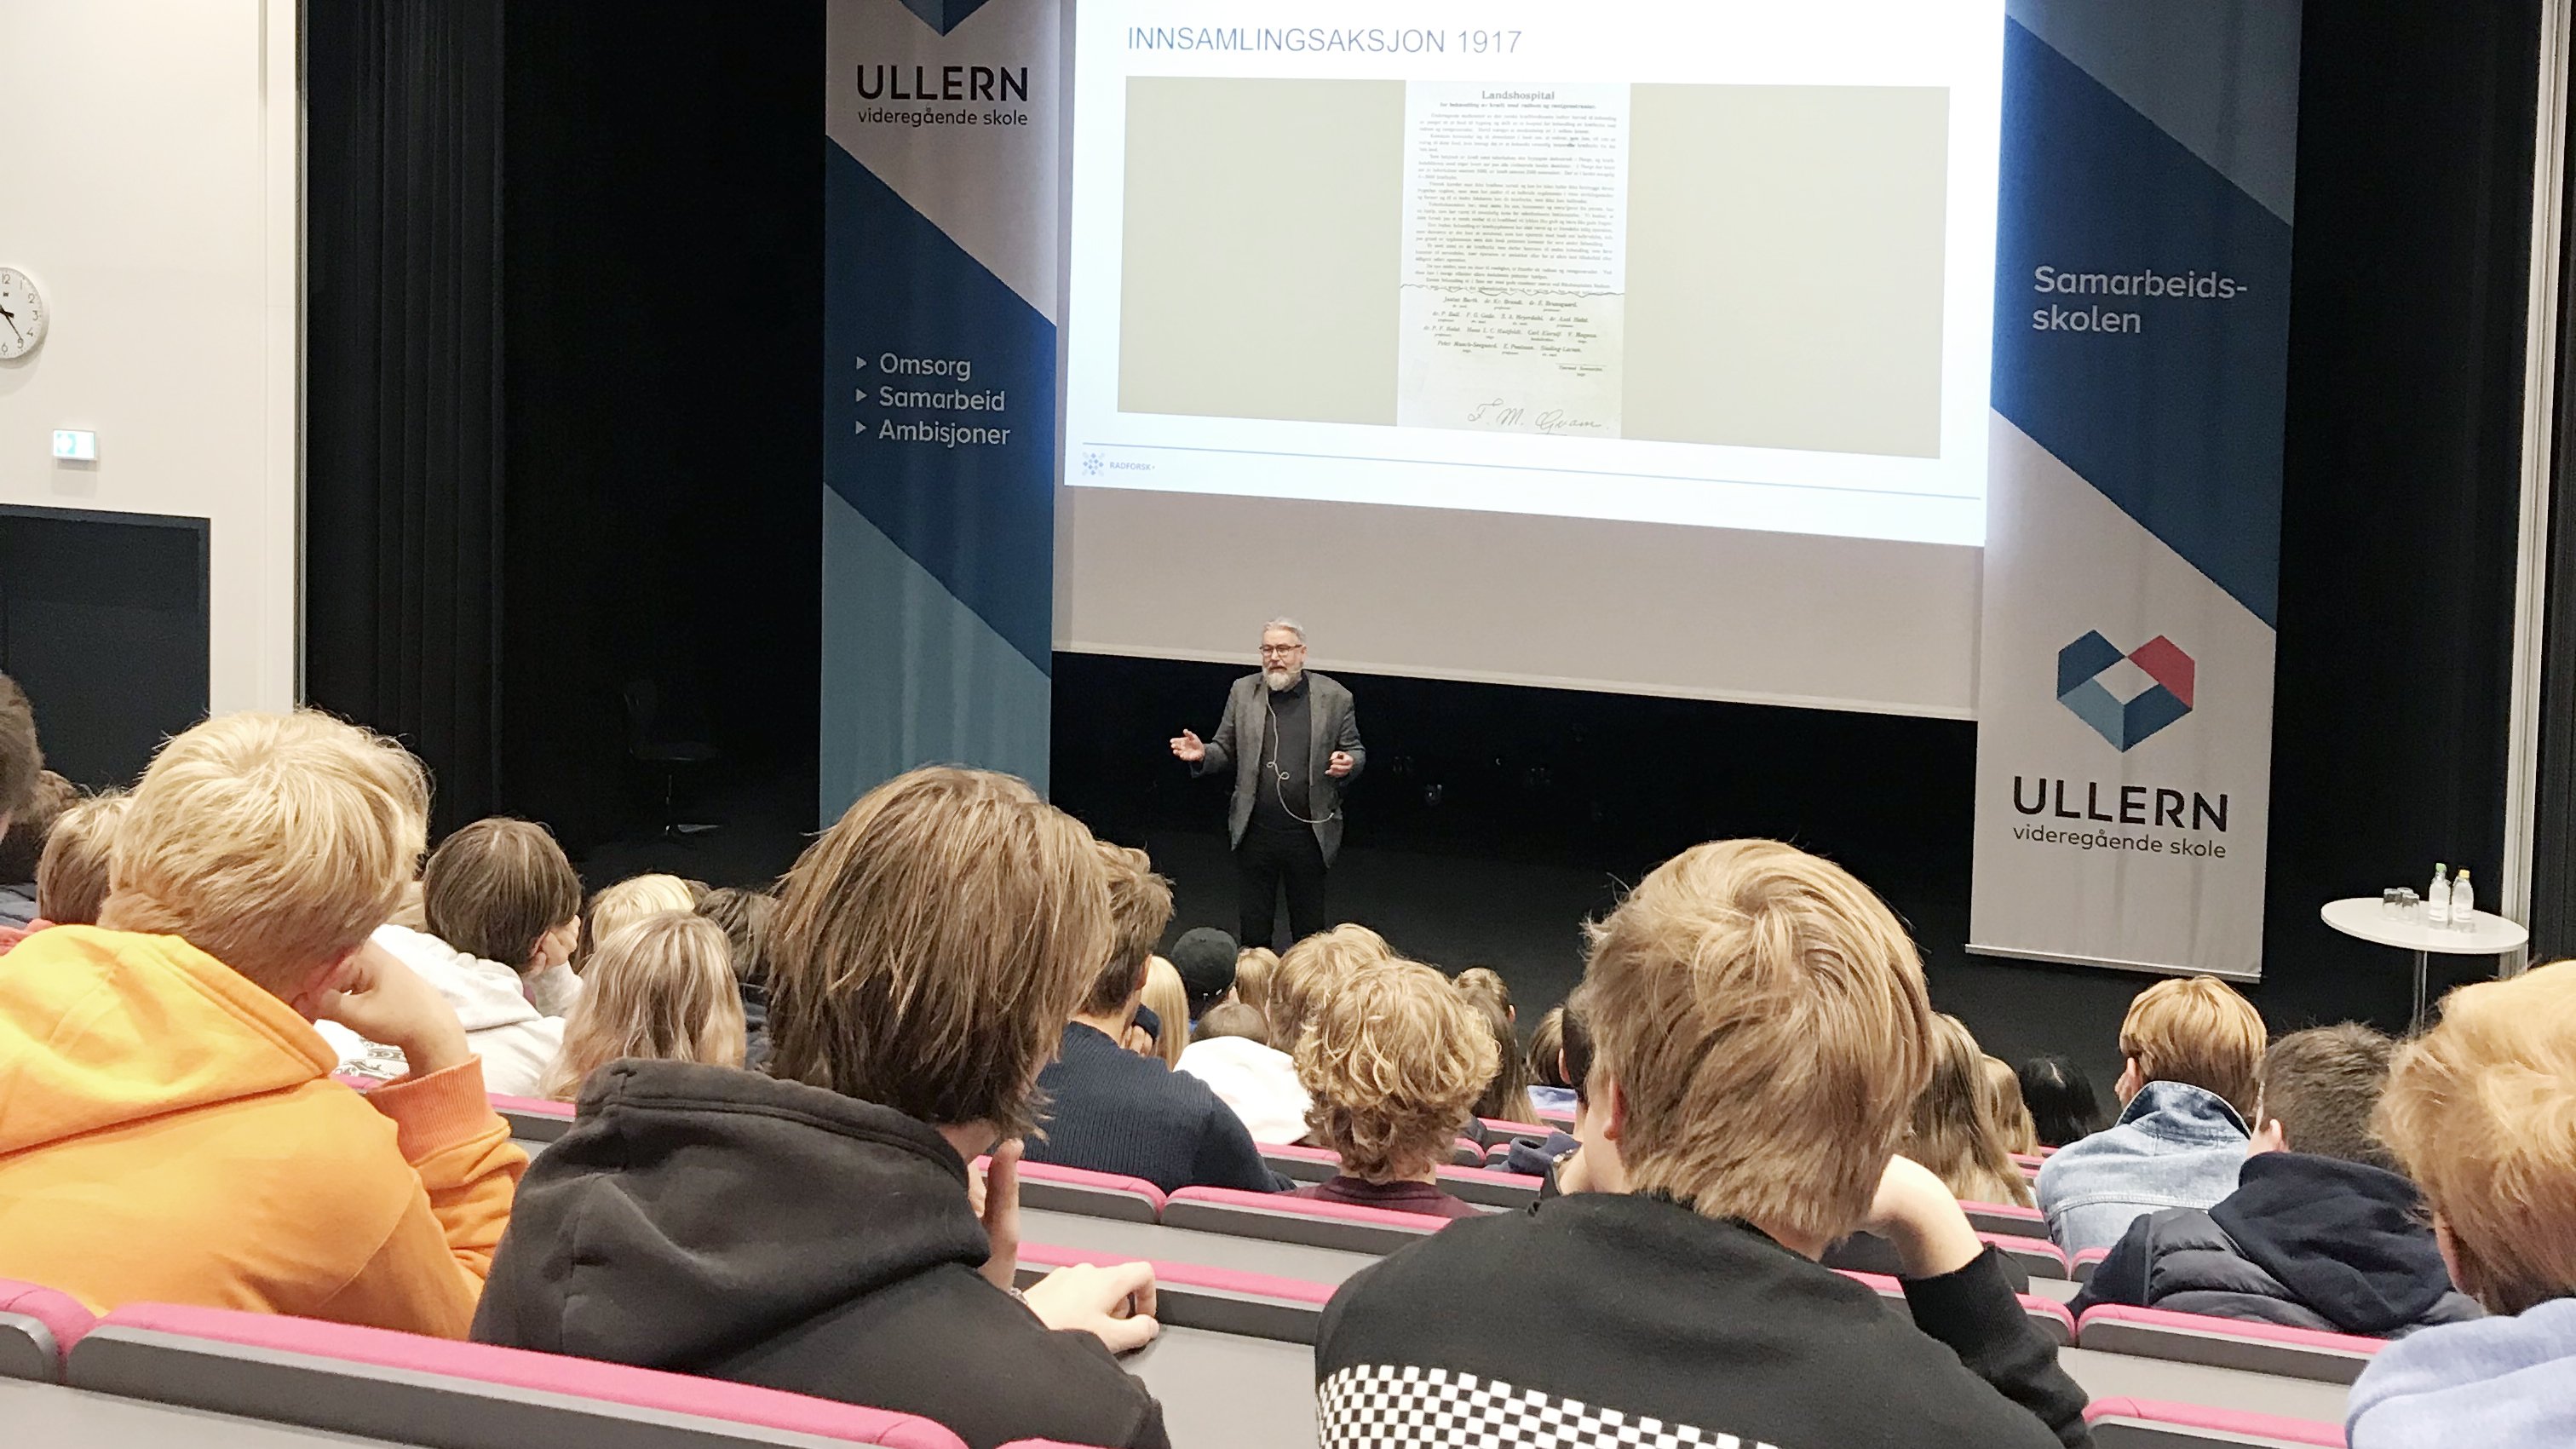 Jonas Einarsson lecturing to students at Ullern